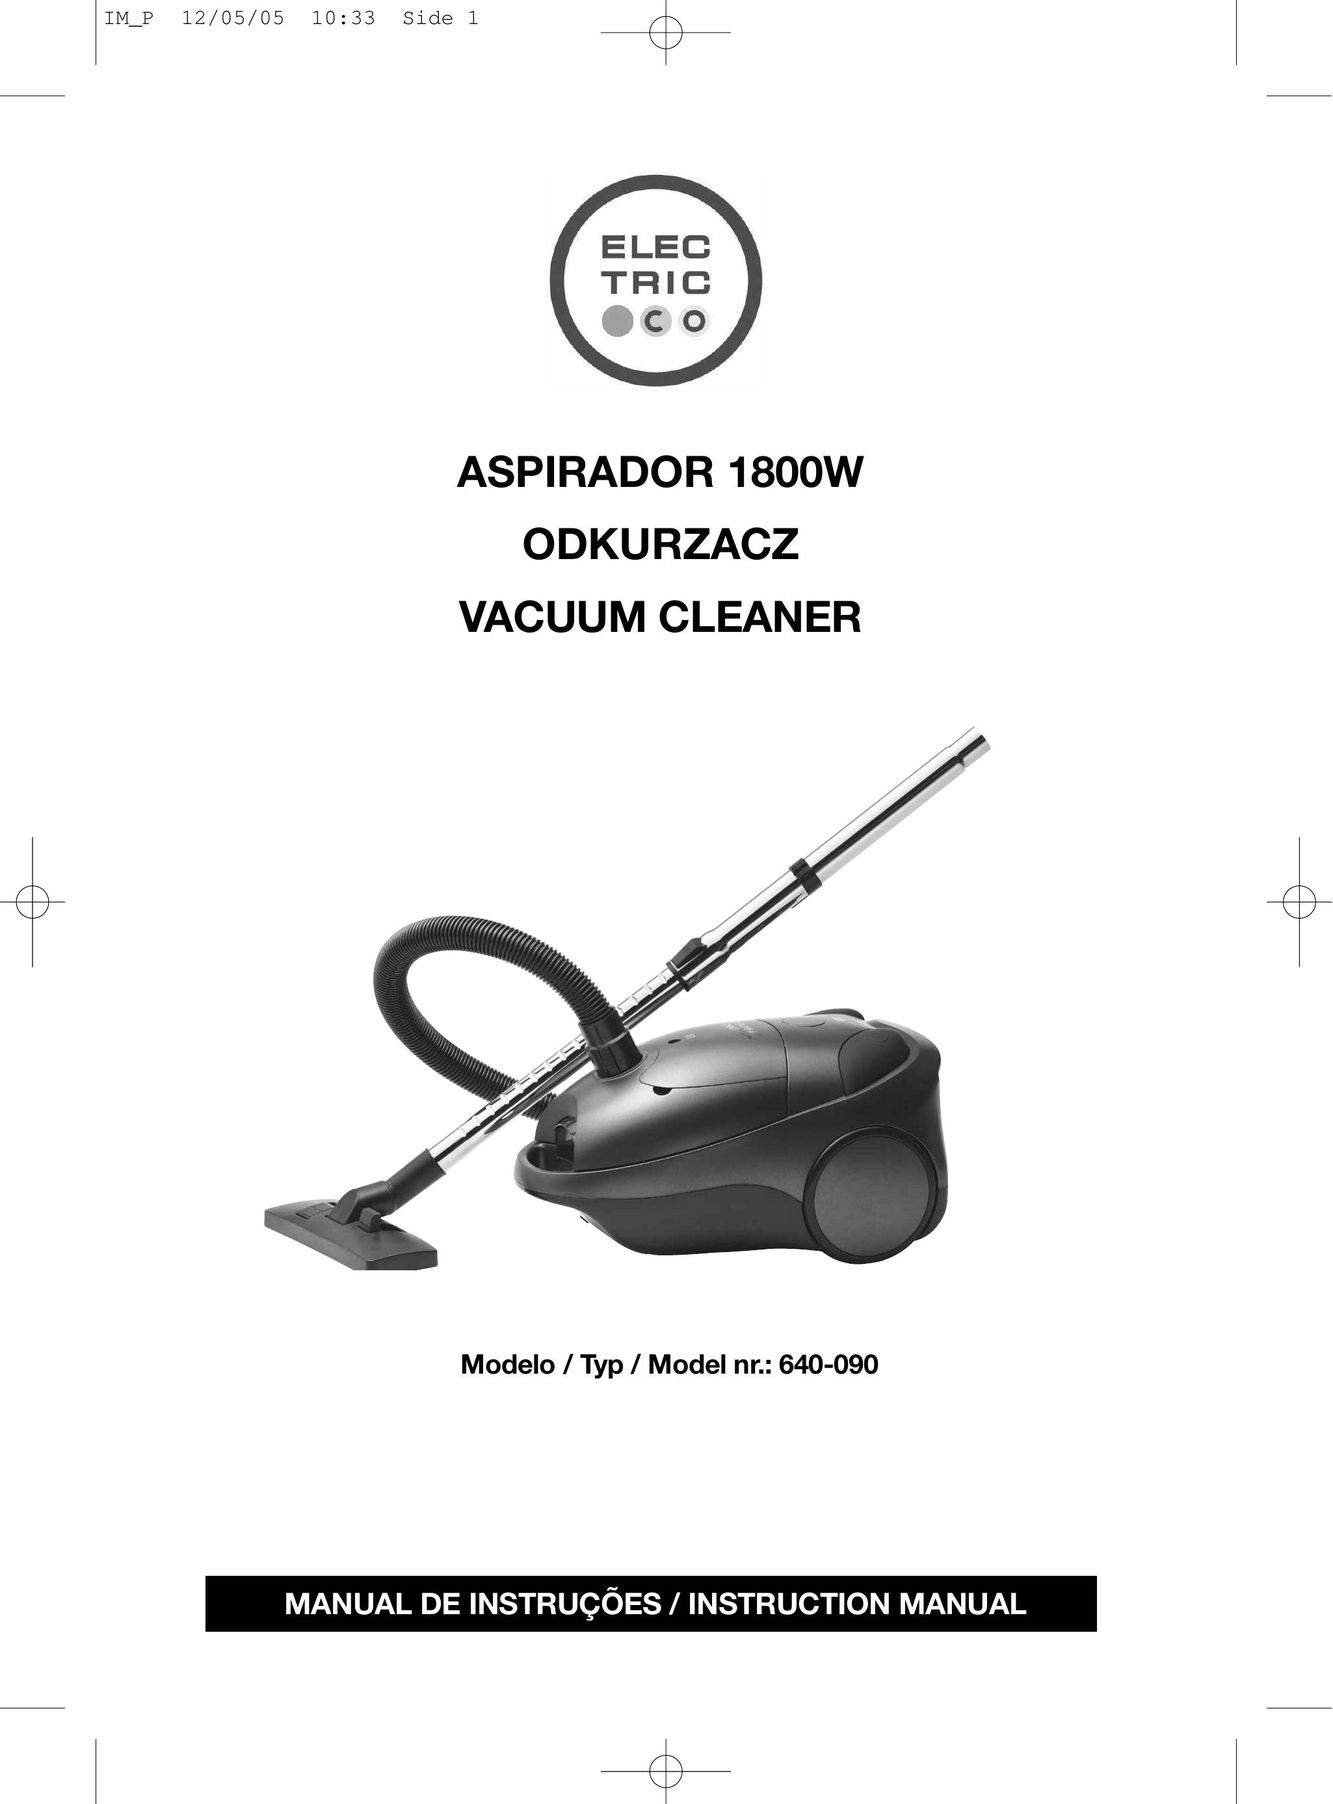 Electric-Spin 640090 Vacuum Cleaner User Manual